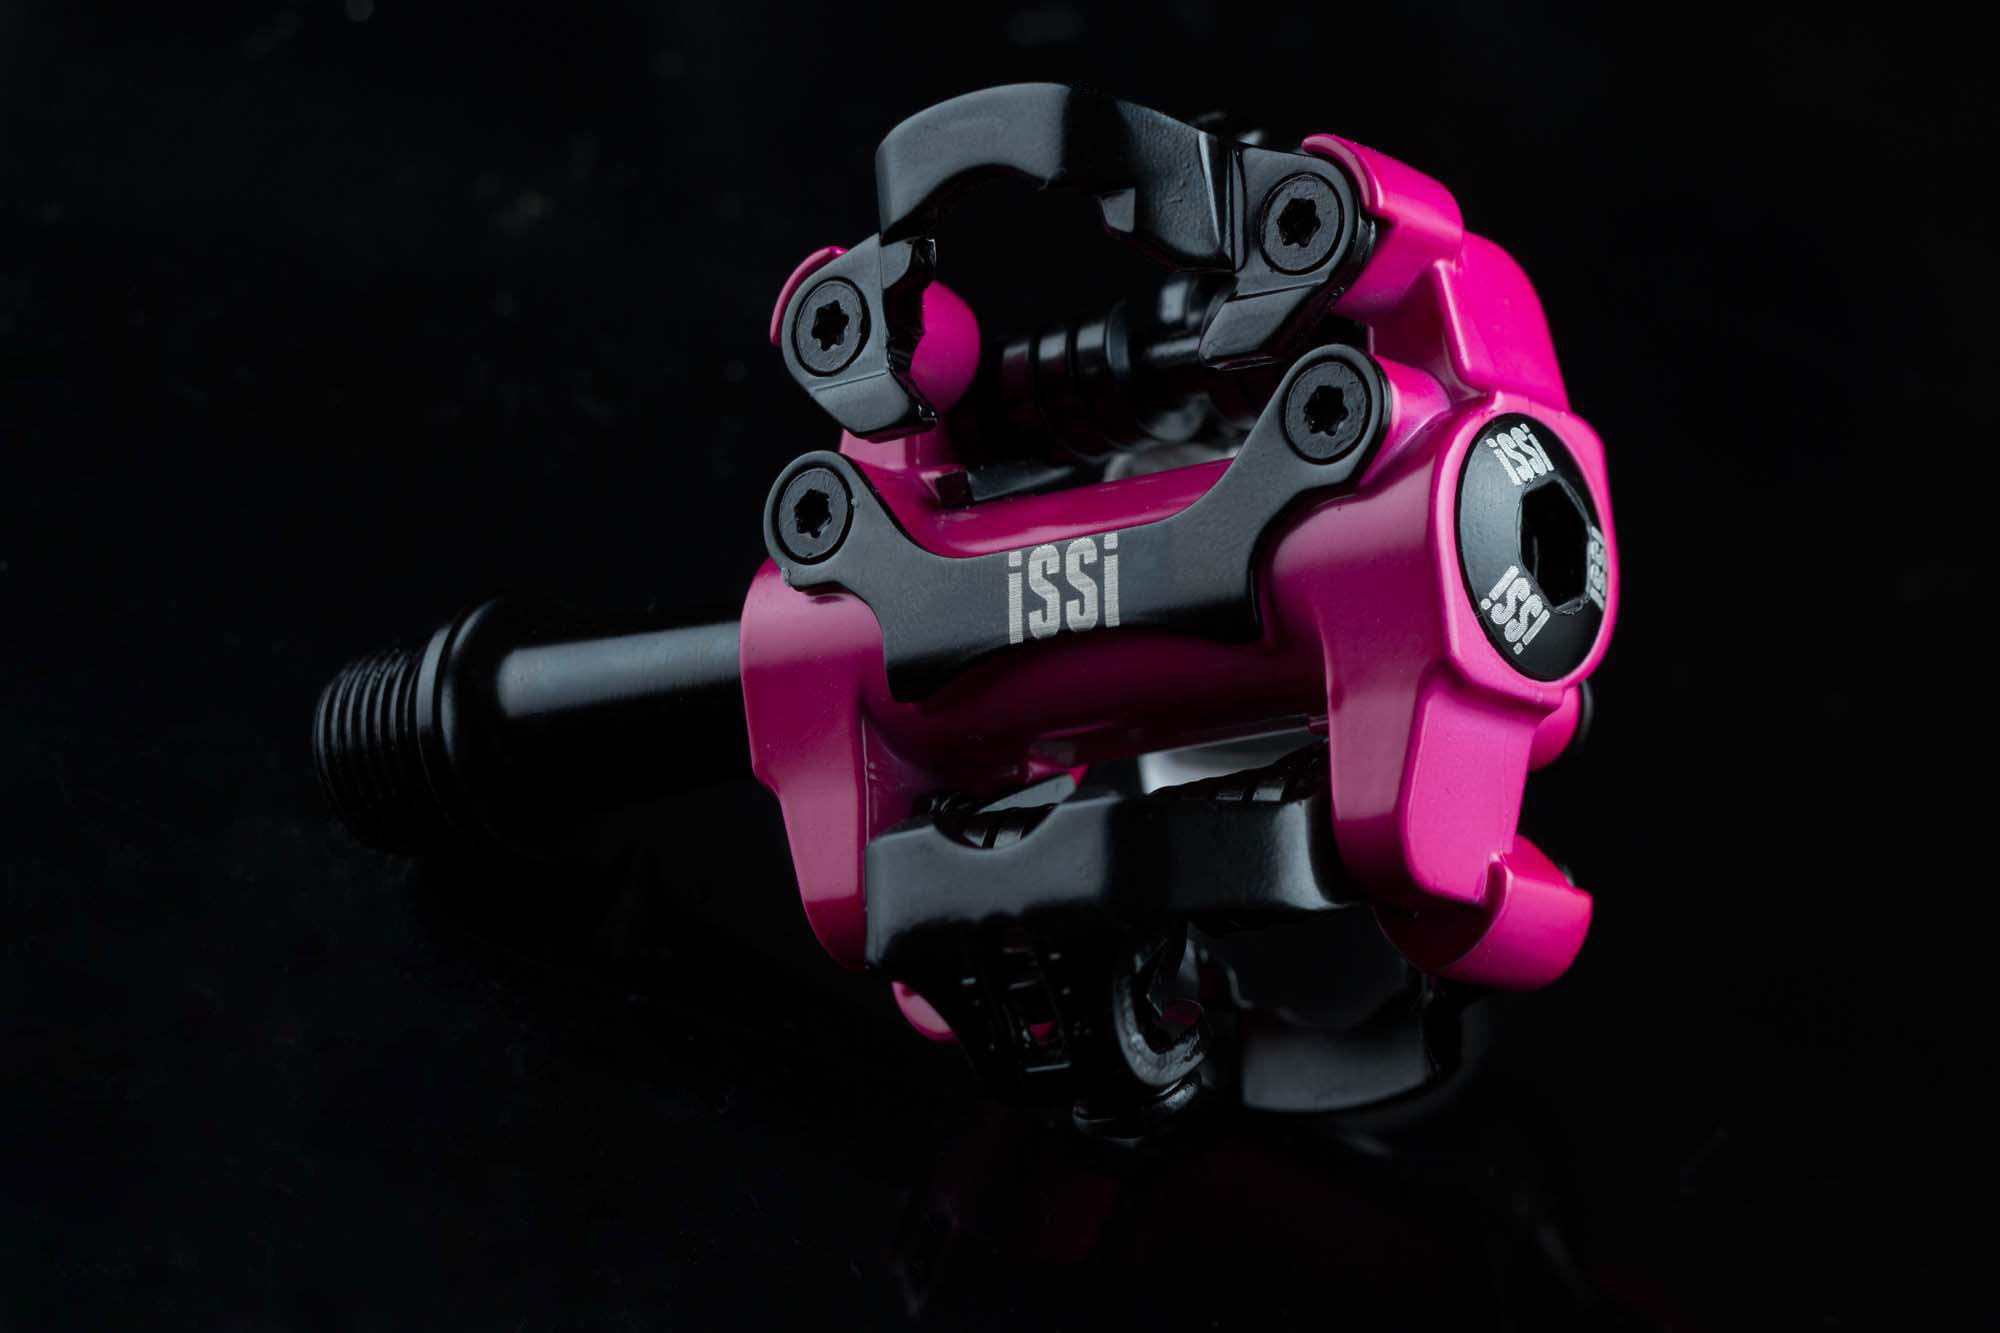 Photo: iSSi is QBP’s new pedal brand, and they’re providing a compelling, colorful alternative to Shimano SPD pedals... 